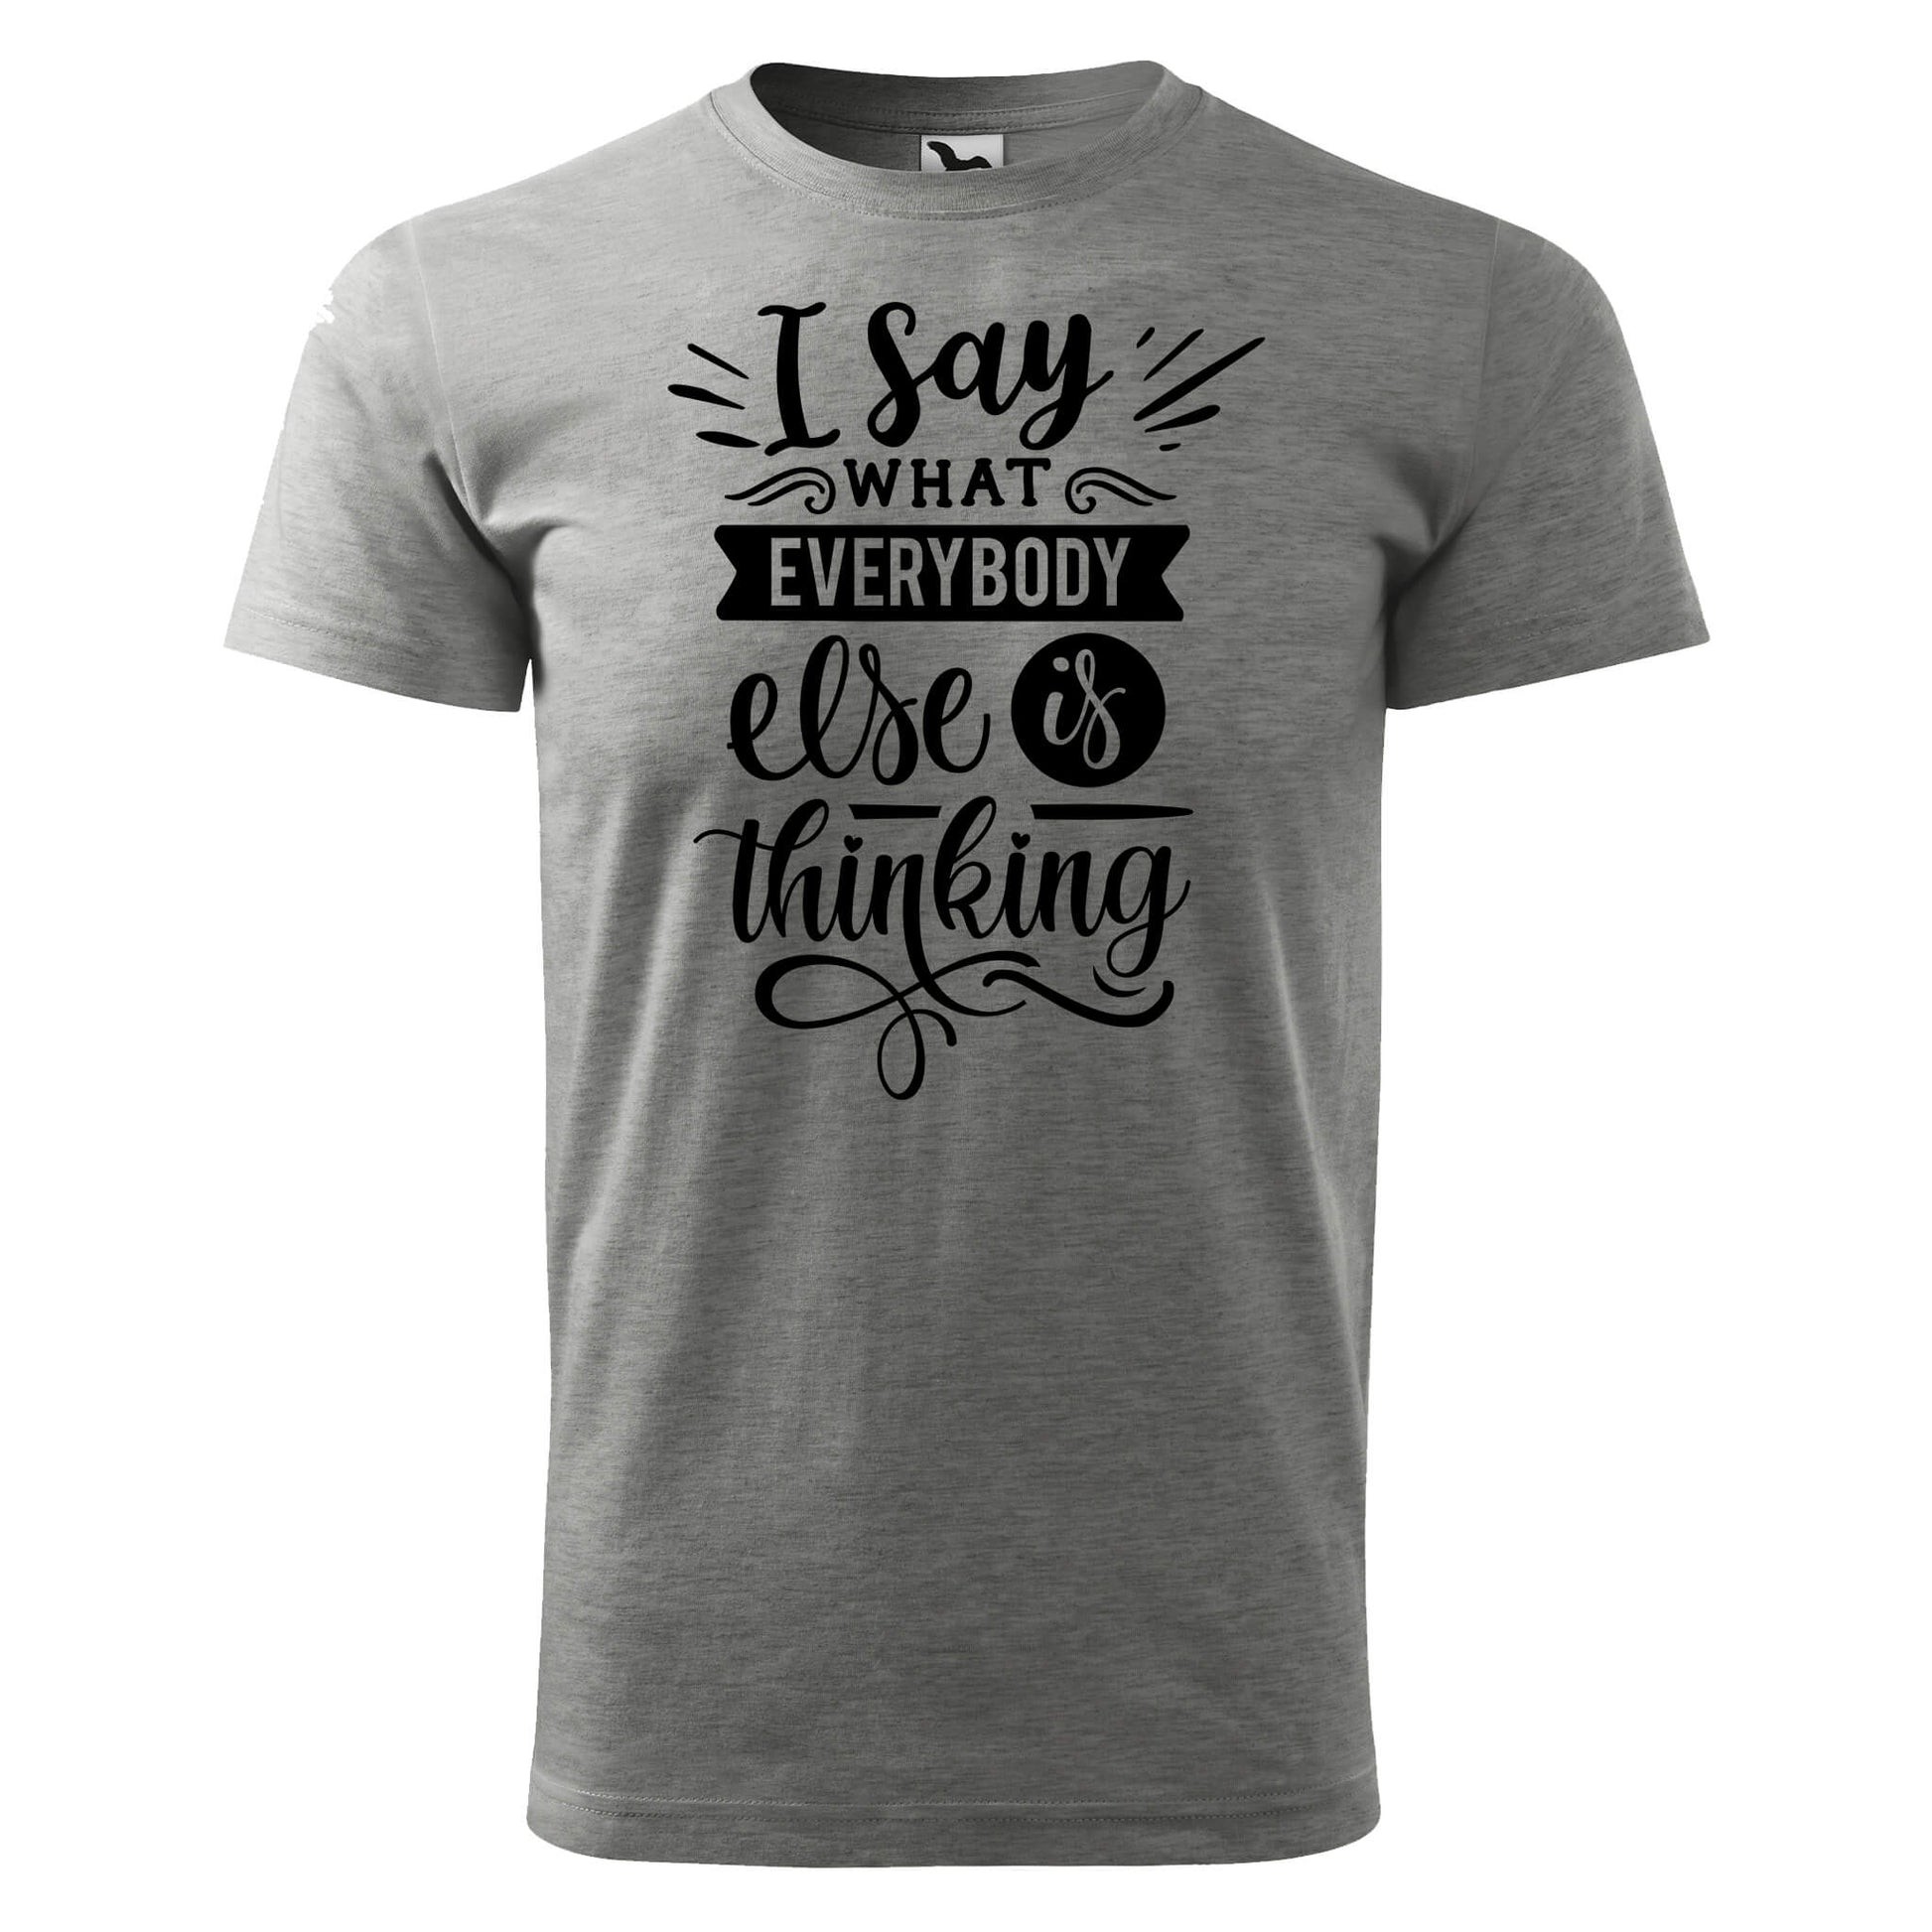 I say what everybody is thinking t-shirt - rvdesignprint